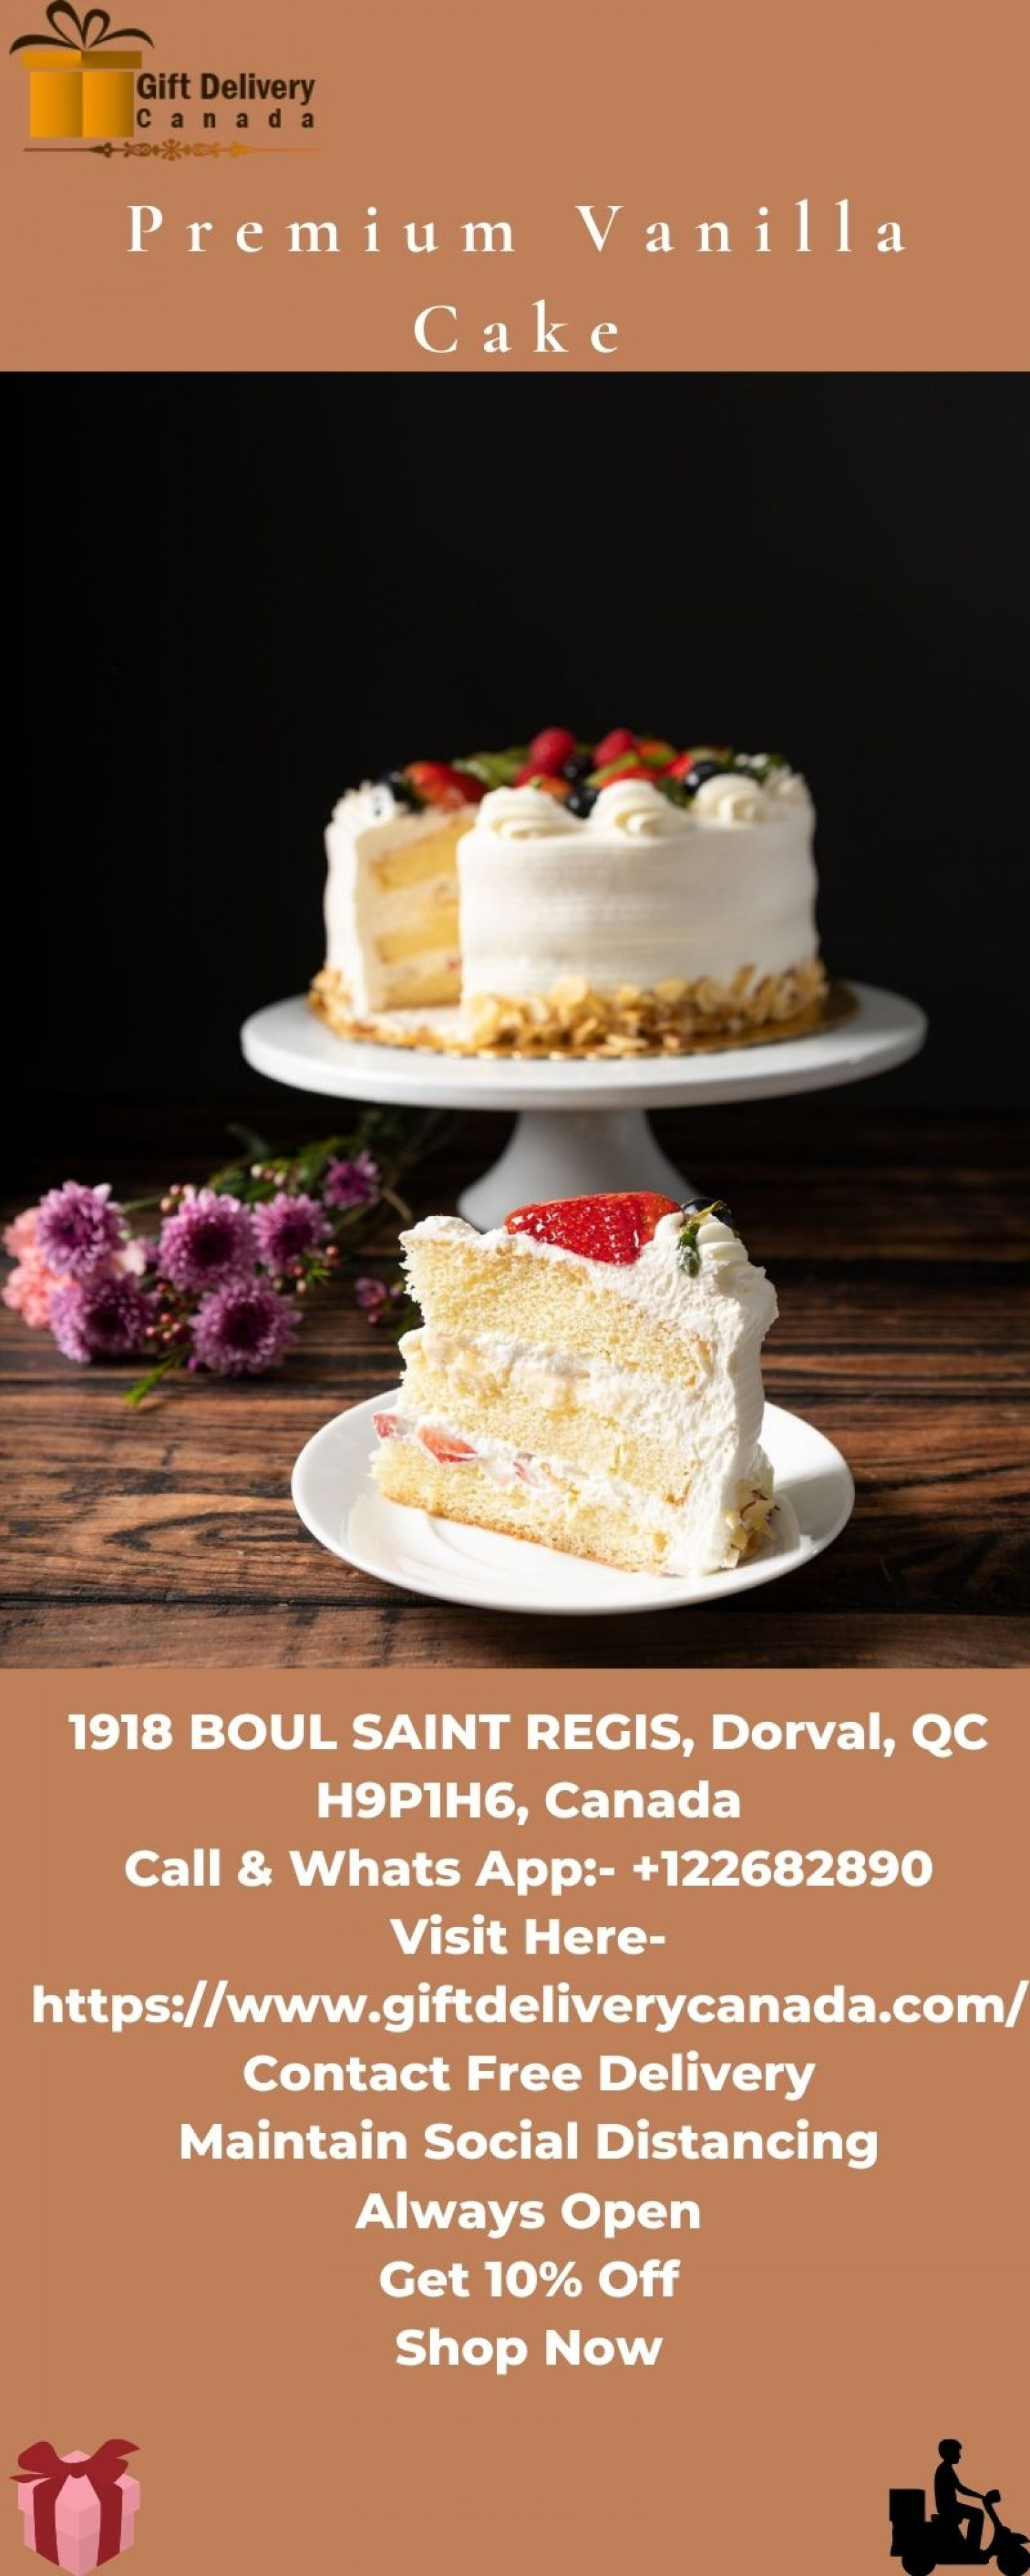 Premium Vanilla Cake Delivery in Sherbrooke Canada | Gift Delivery Canada Infographic